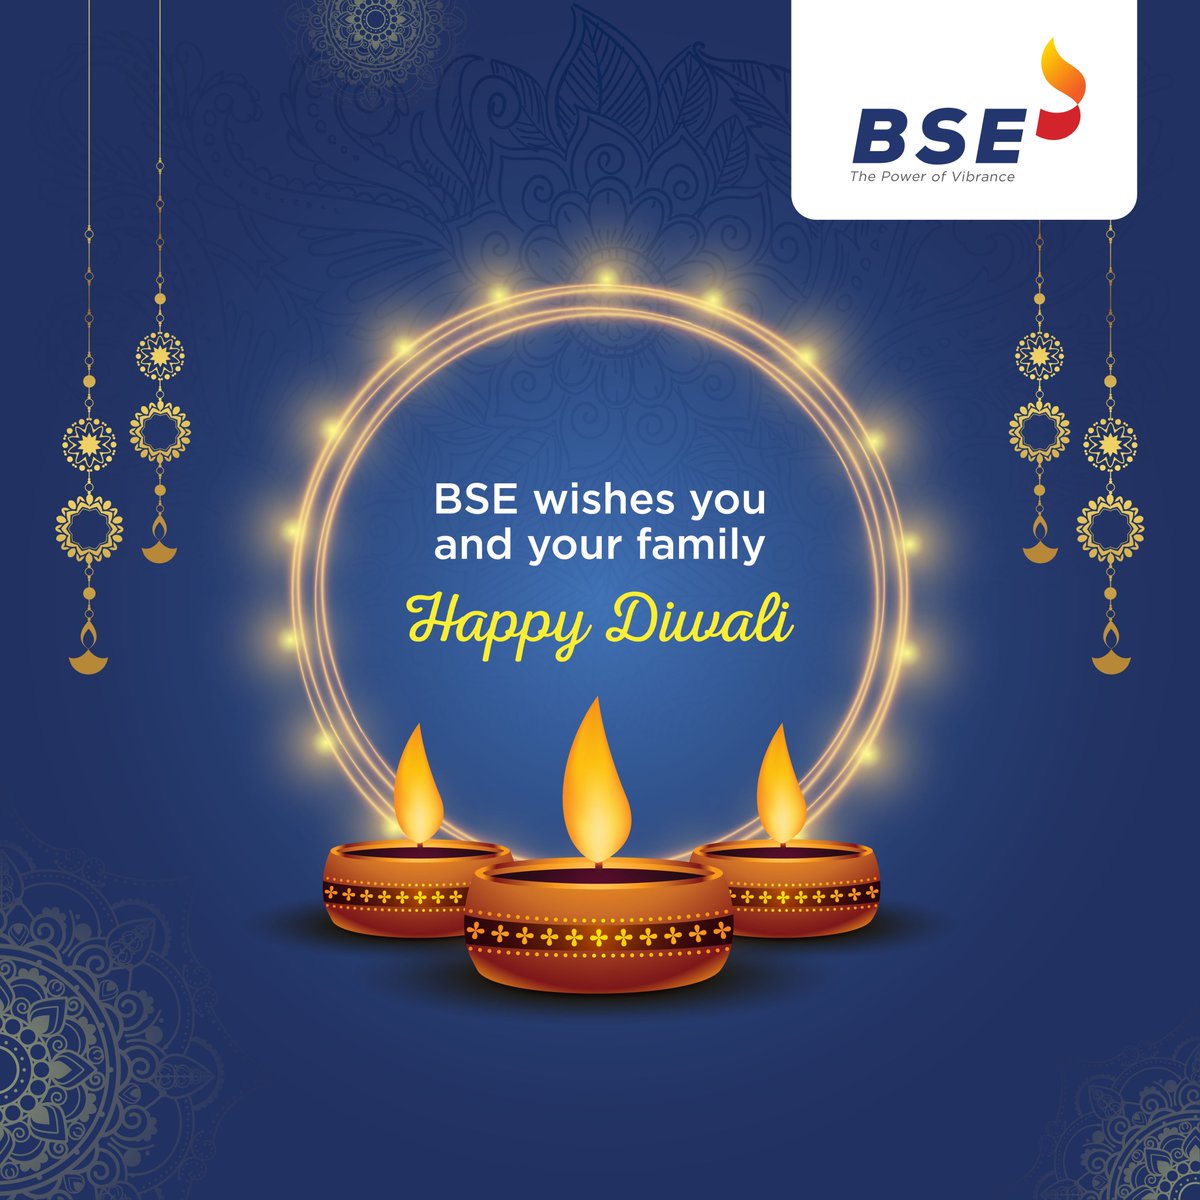 May the festival of lights brighten your life with joy, prosperity, and success! Wishing everyone a sparkling and #HappyDiwali. ✨🪔 #Diwali #Diwali2023